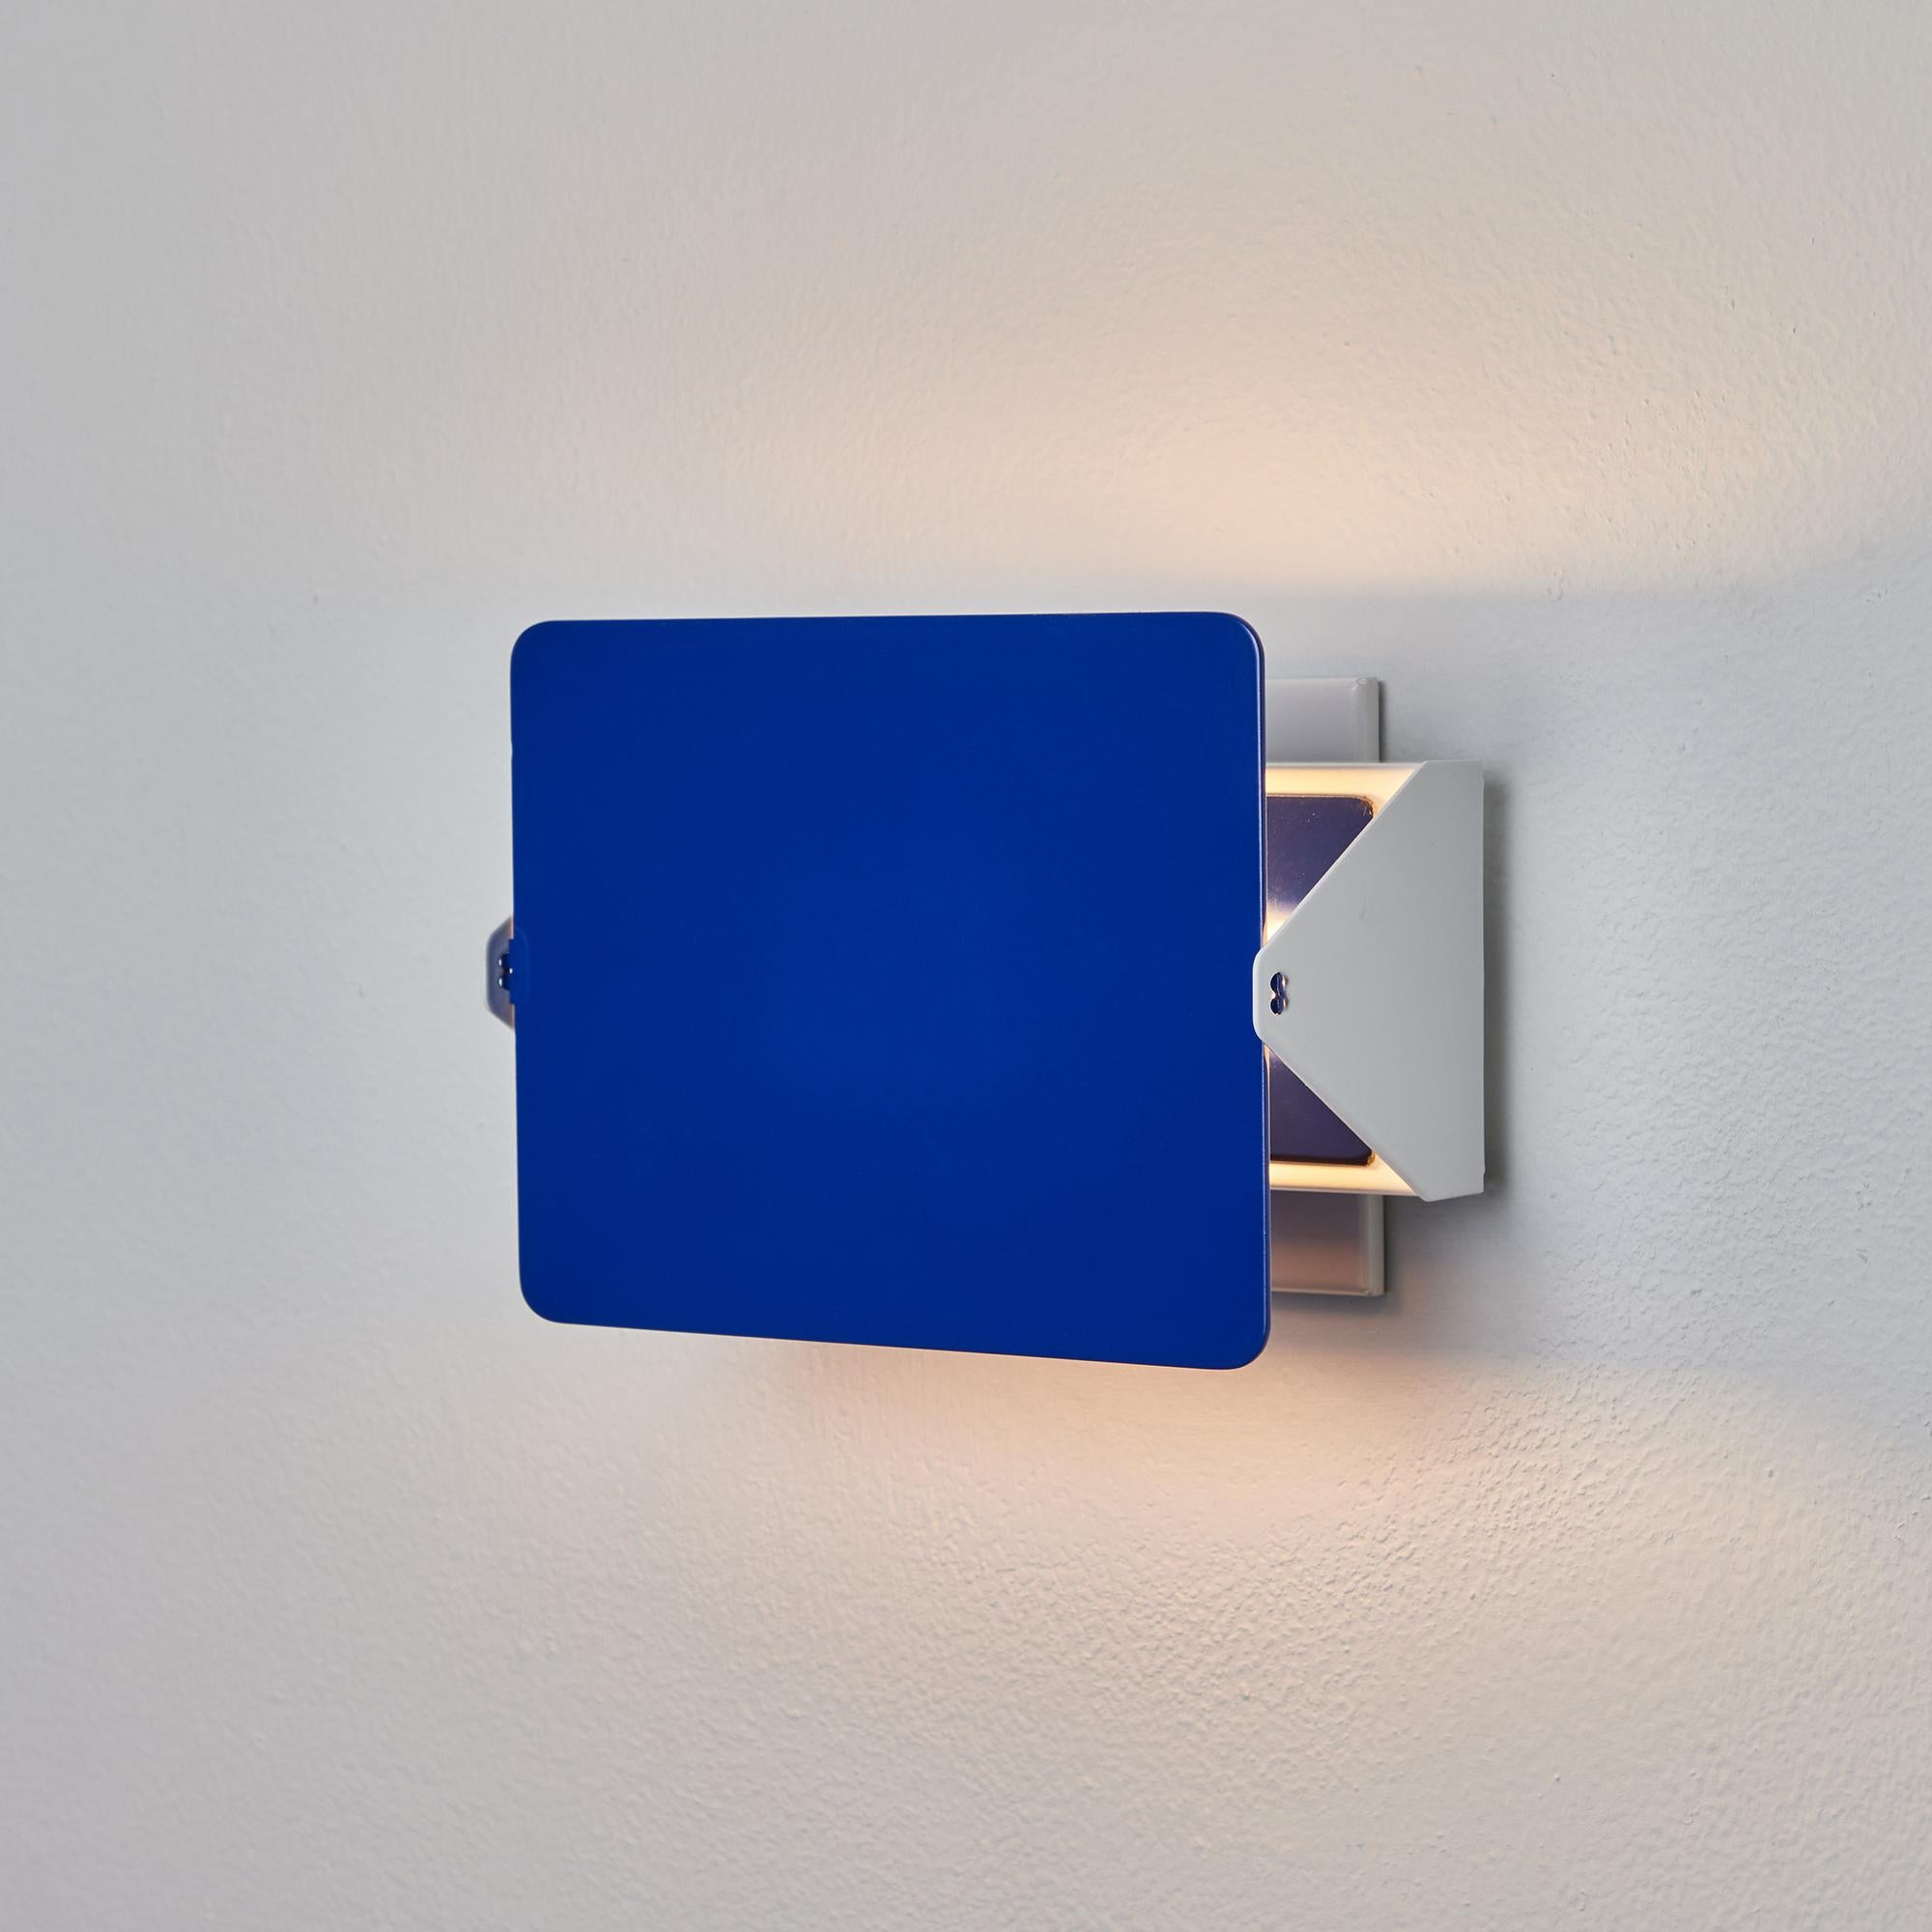 French Charlotte Perriand 'Applique à Volet Pivotant' Wall Light in Blue for Nemo For Sale